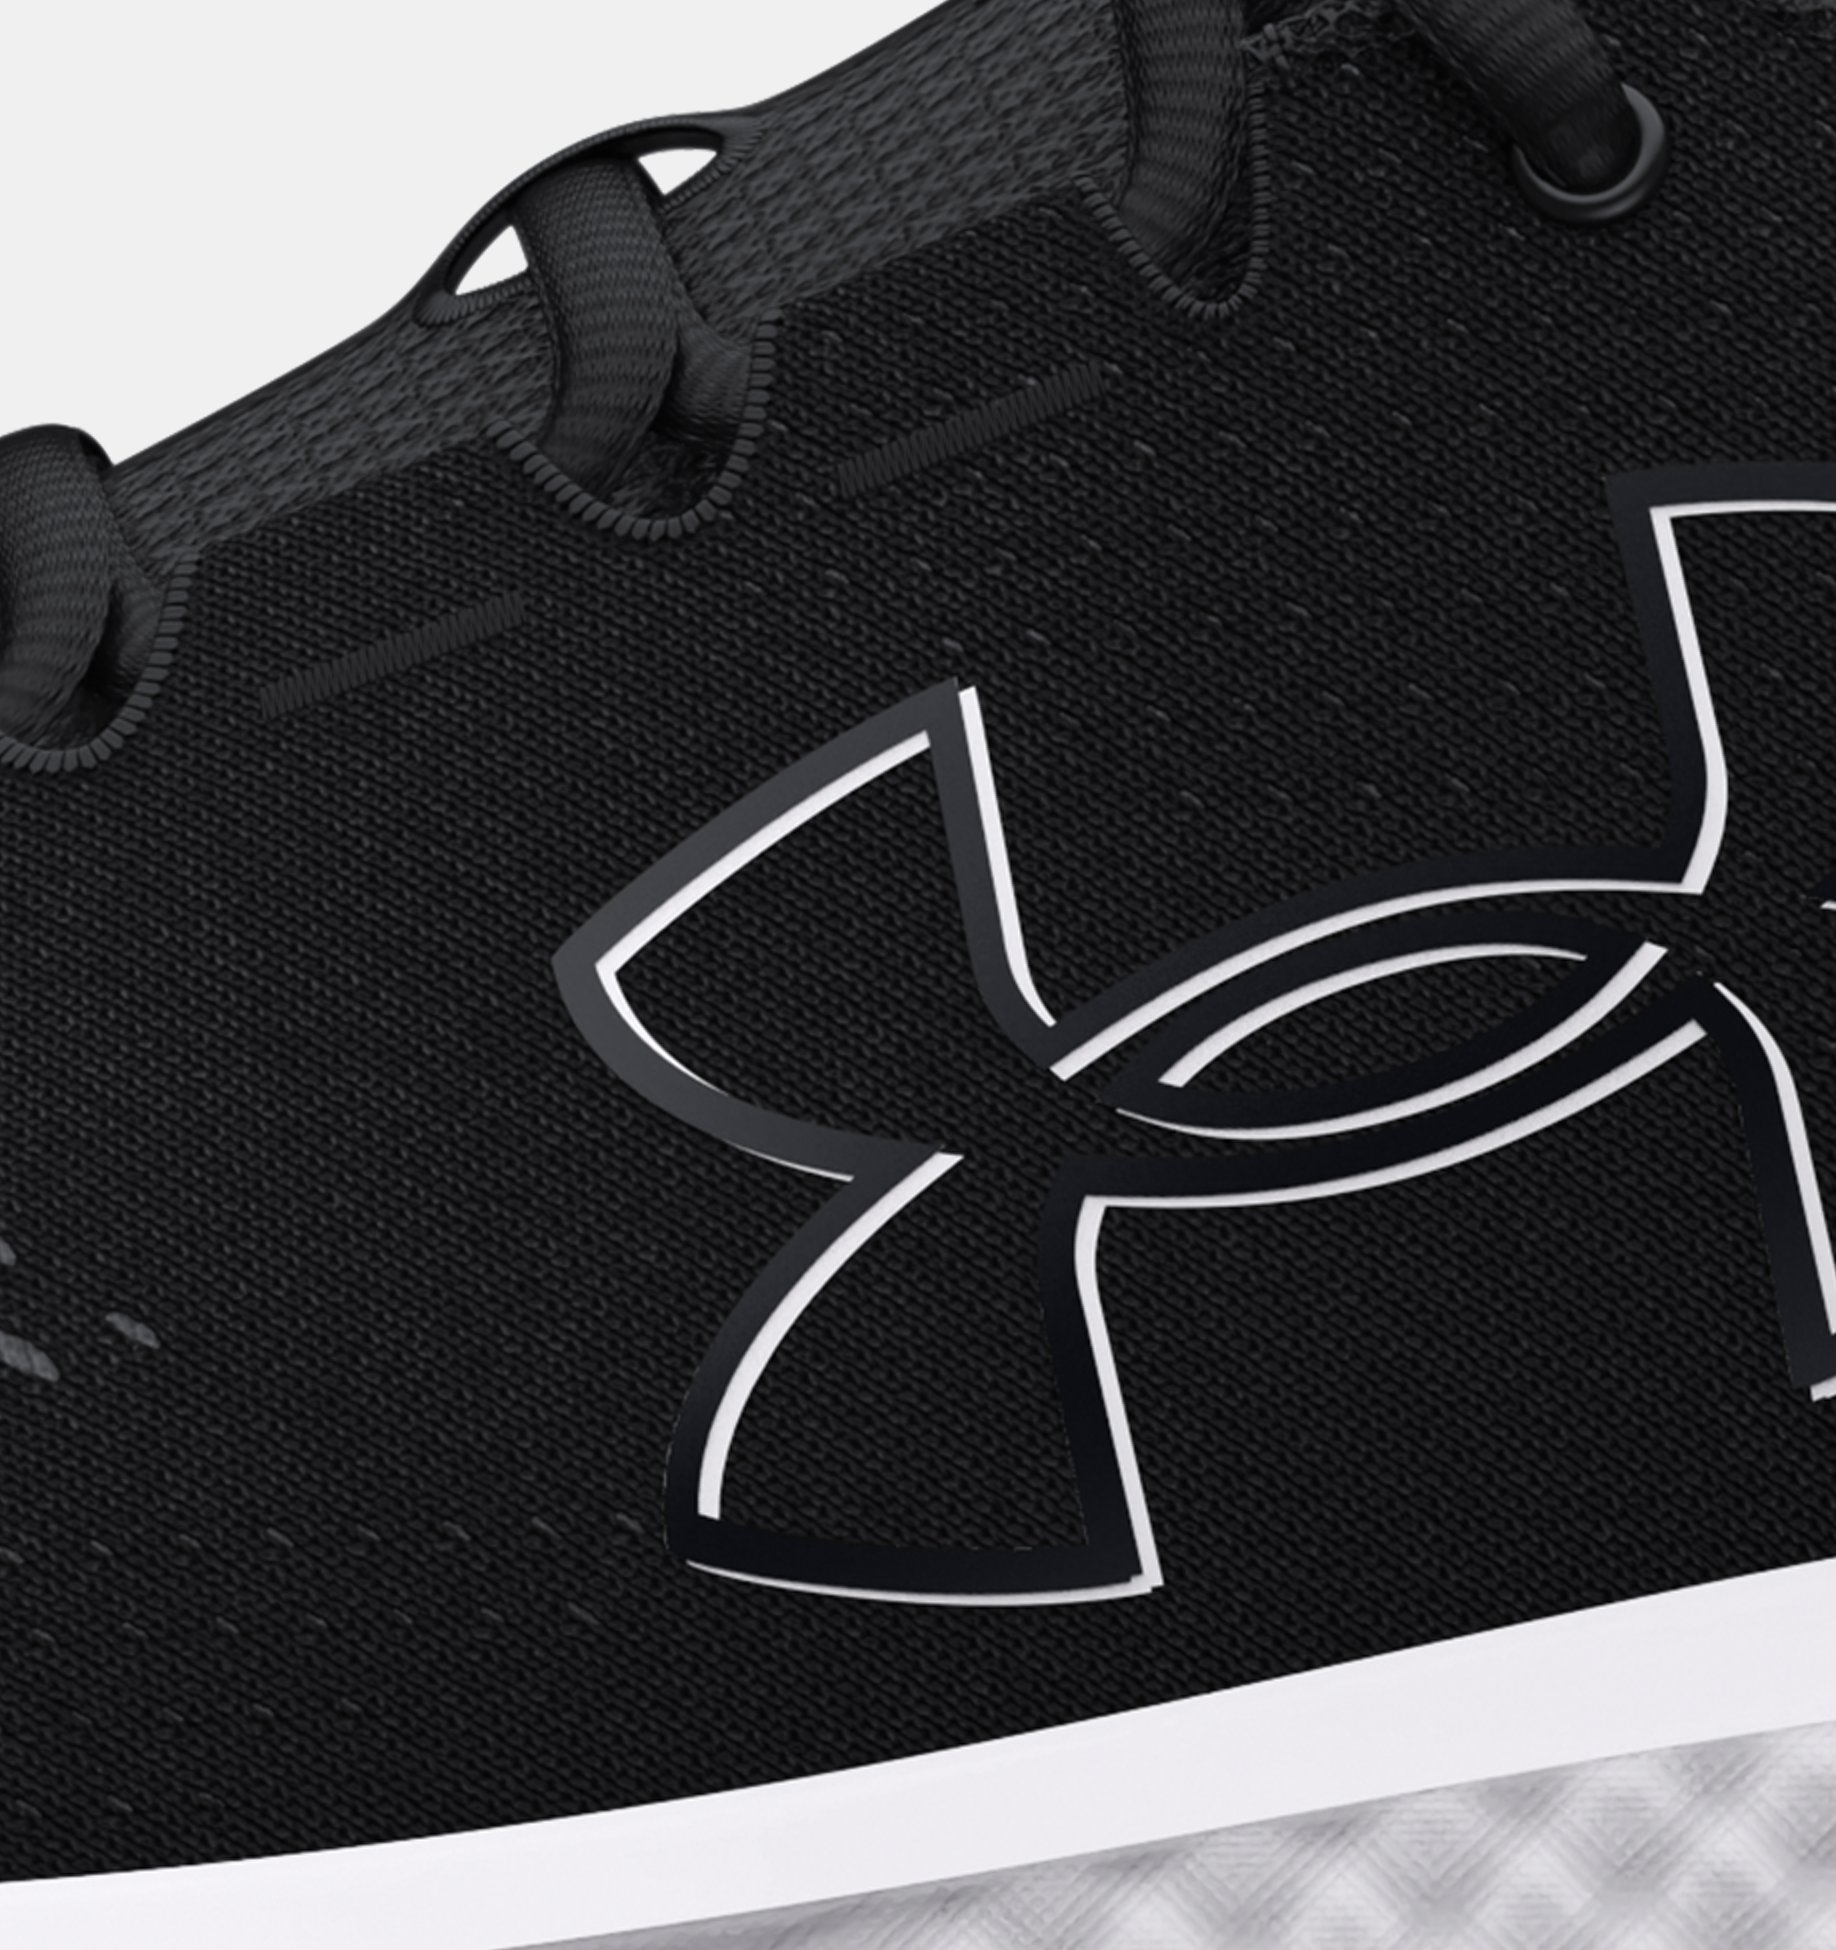 UNDER ARMOUR Charged Pursuit 3 - Black/Pink